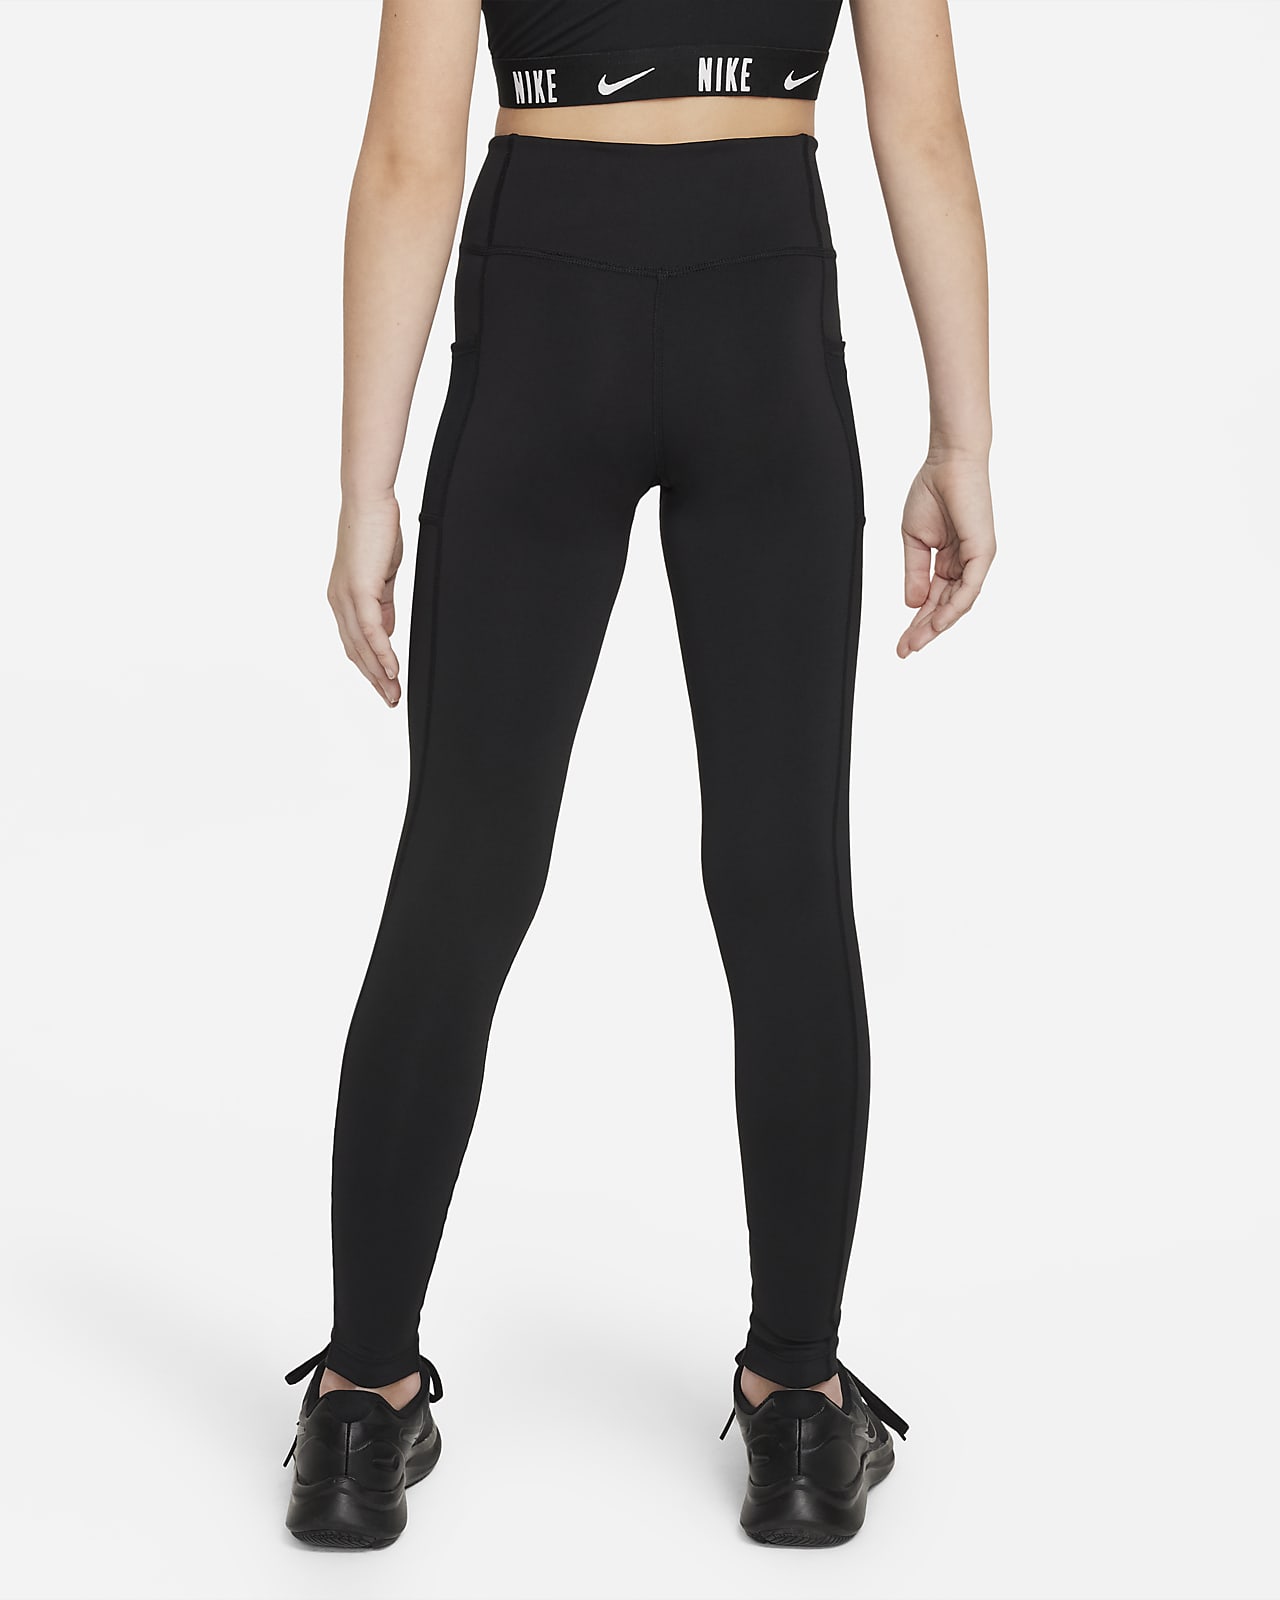 https://static.nike.com/a/images/t_PDP_1280_v1/f_auto,q_auto:eco/ceb8b278-1ef2-4860-9f7d-cabeab5b358d/dri-fit-one-older-leggings-with-pockets-ZZFPXt.png